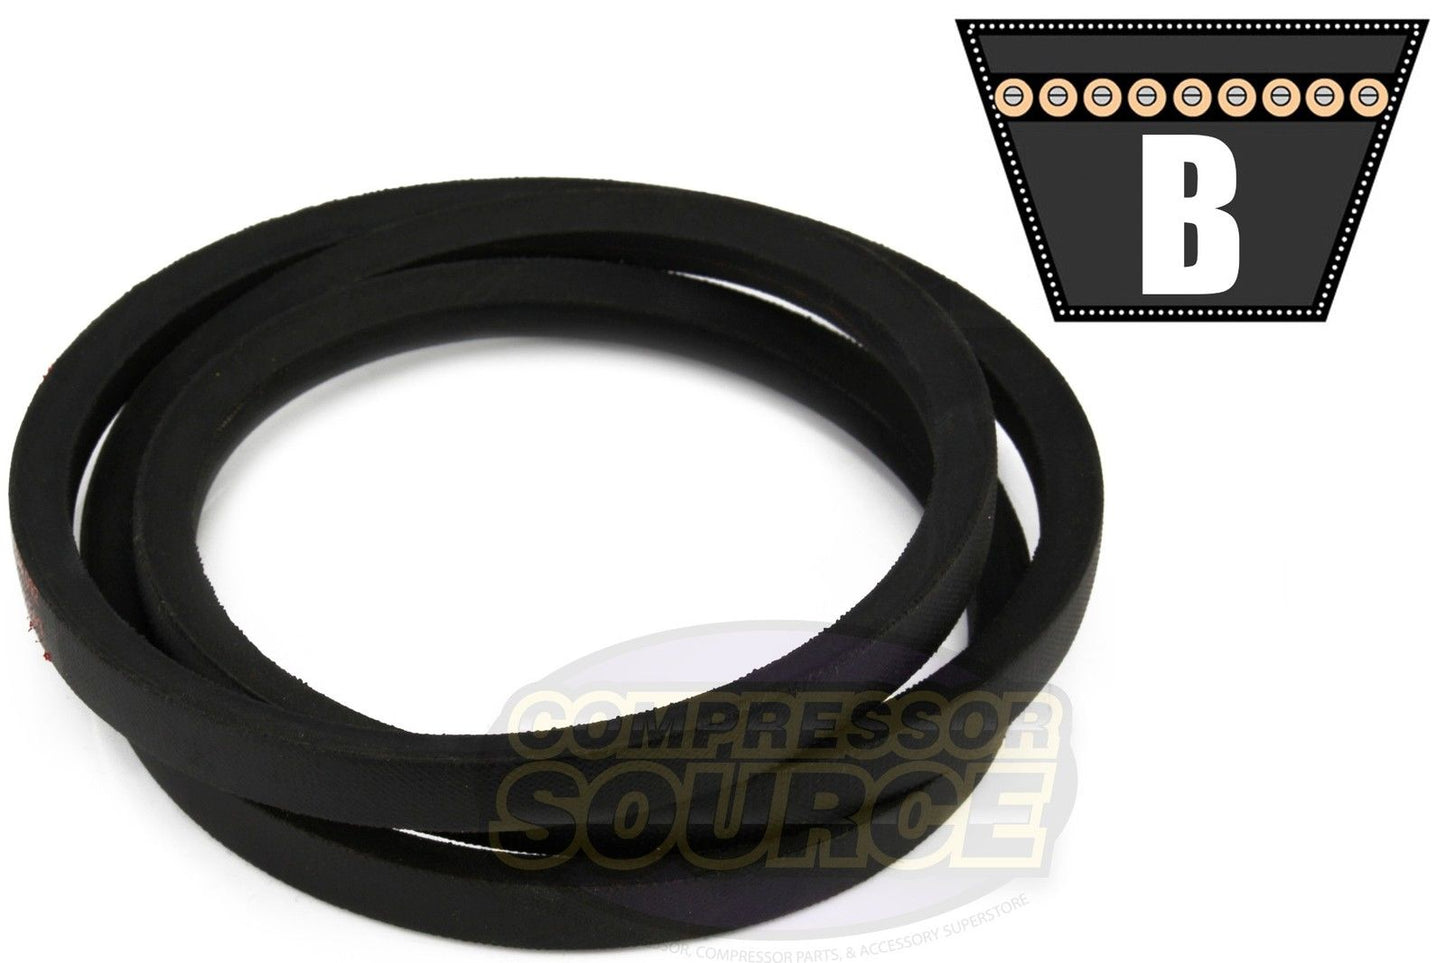 B75 Replacement High Quality Industrial & Lawn Mower 5/8" x 78"  V Belt 5L780